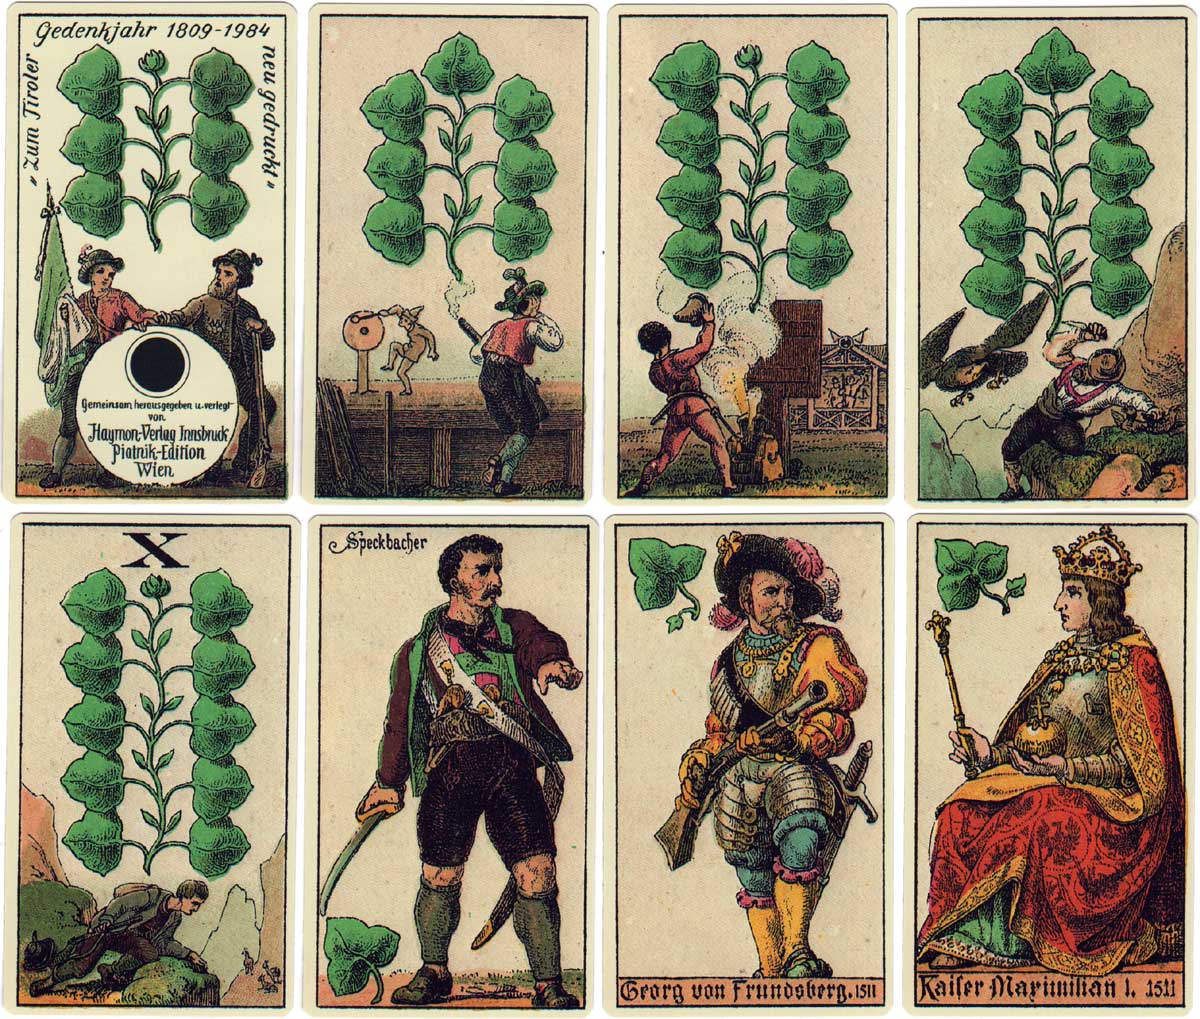 Facsimile of 1878 Tyrolean playing cards published by Piatnik